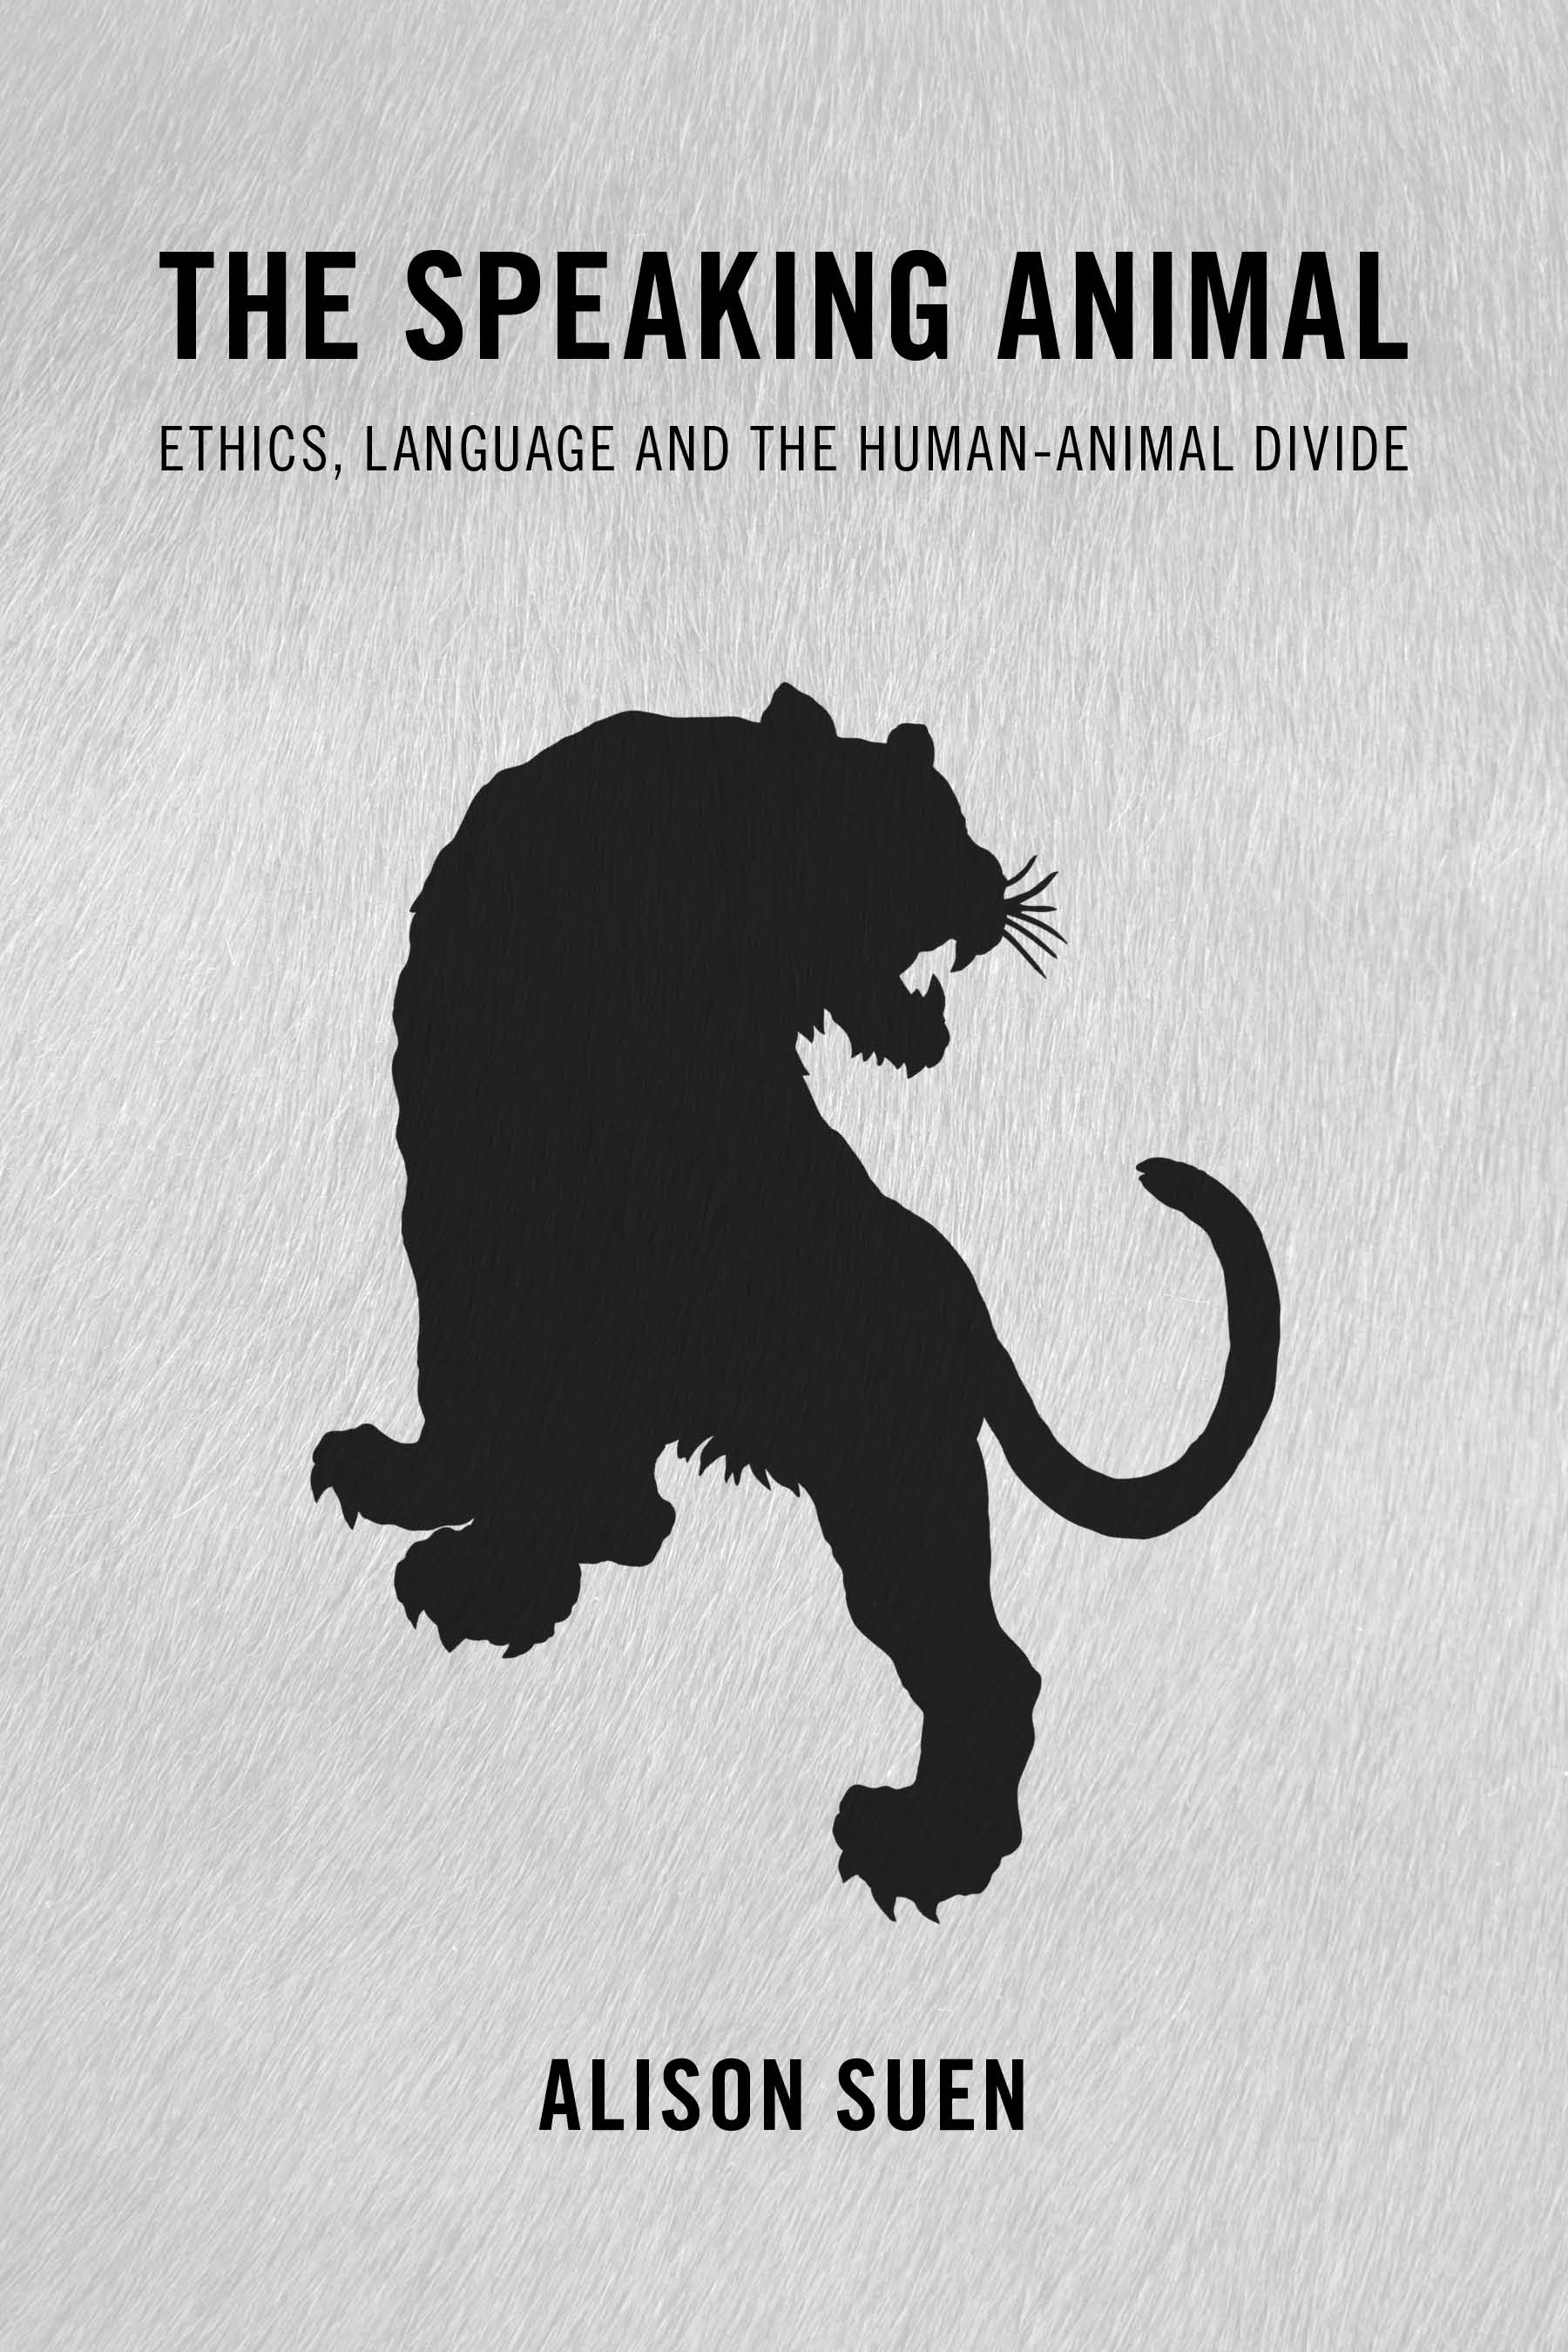 The Speaking Animal: Ethics, Language and the Human-Animal Divide